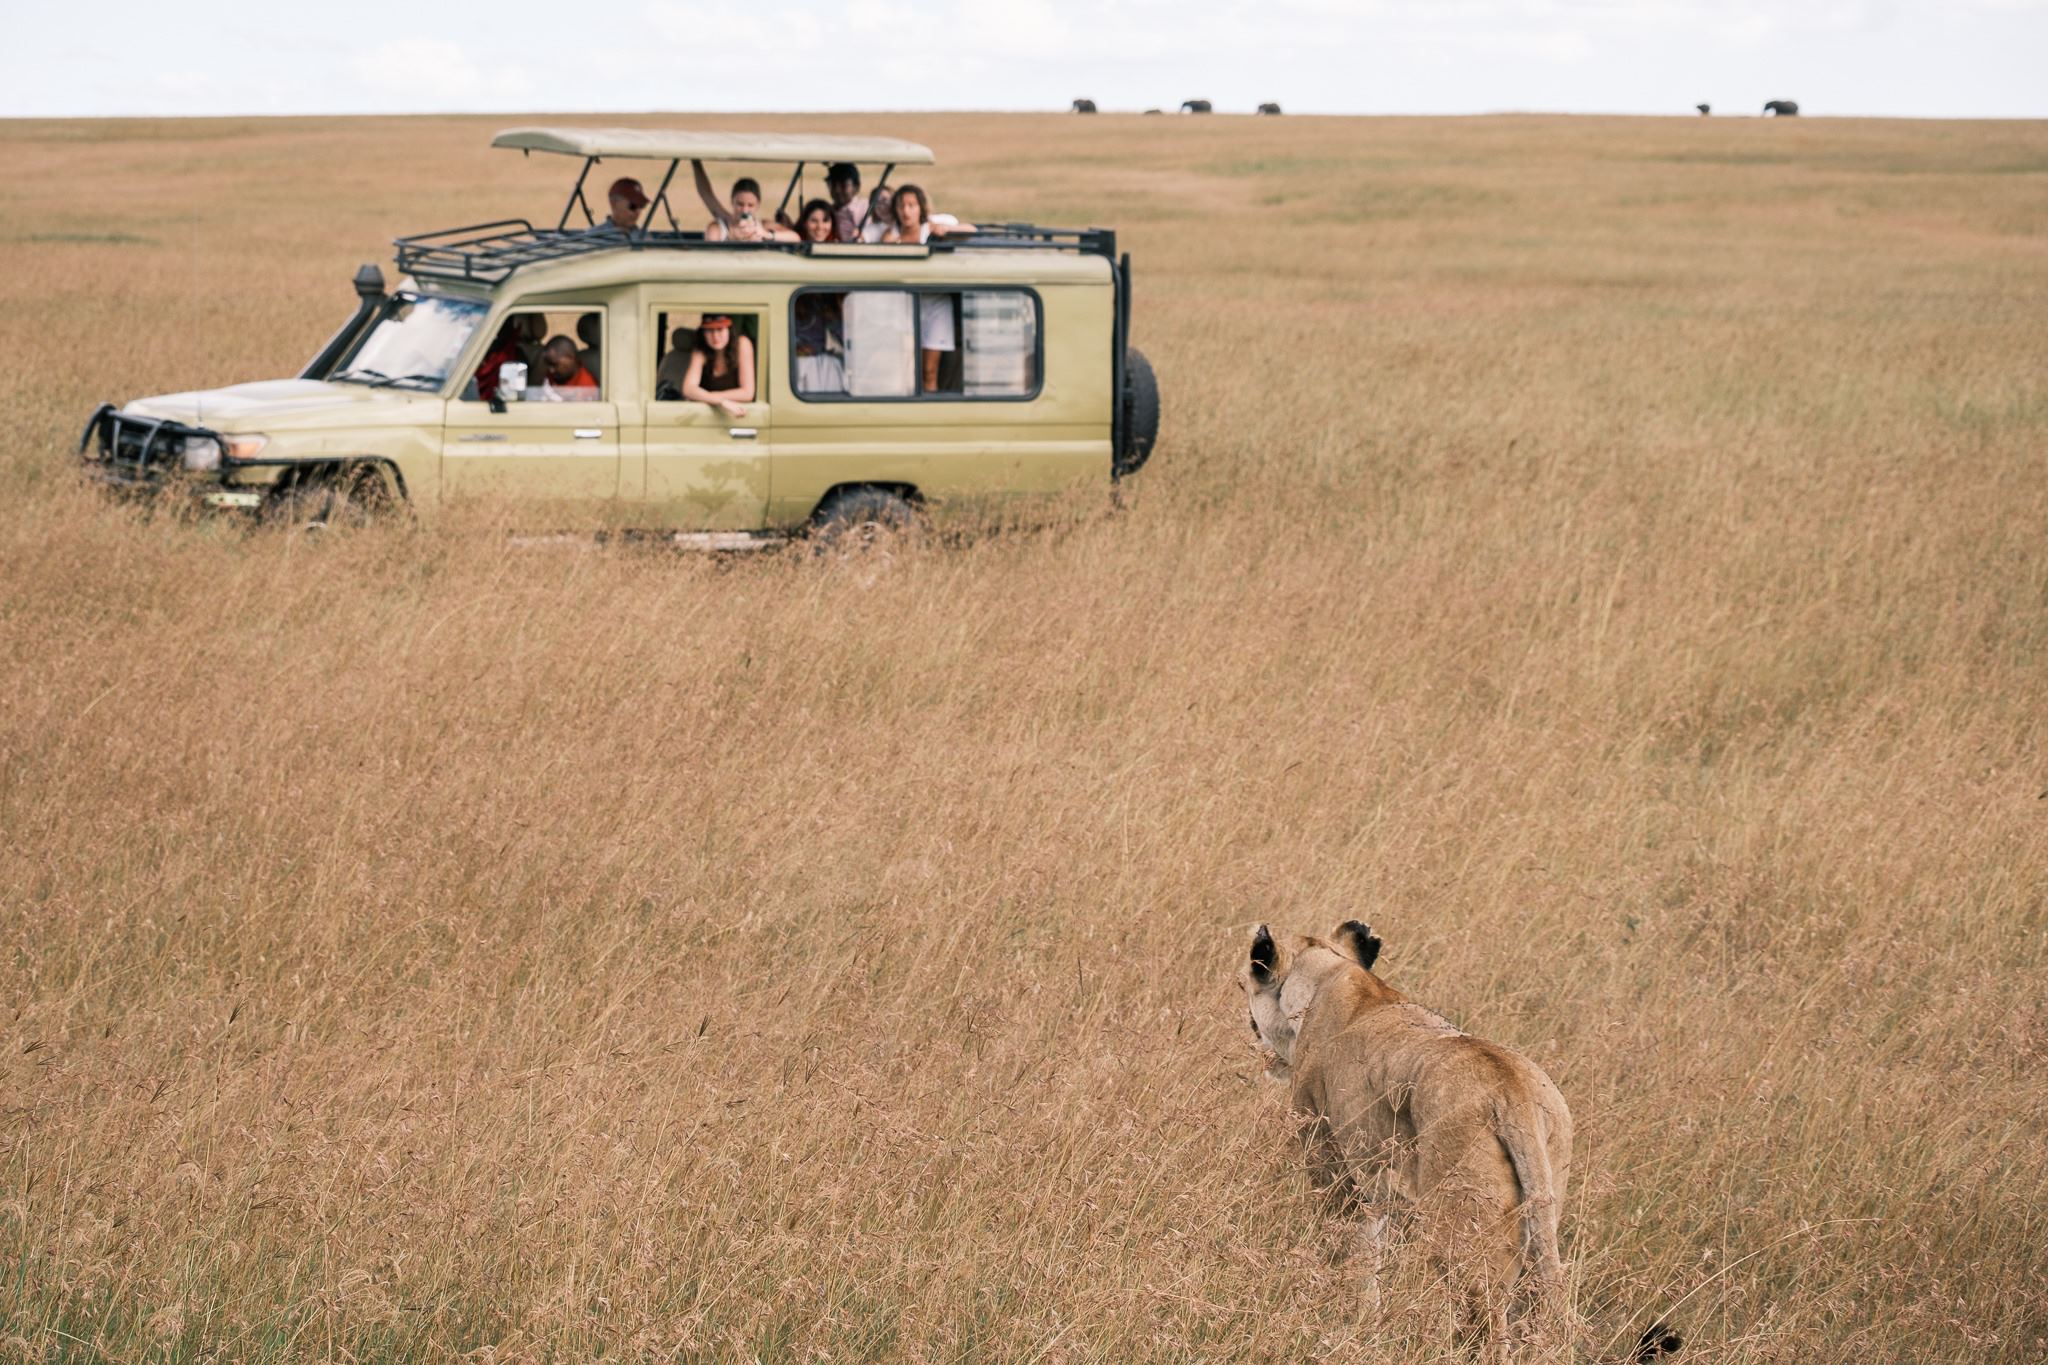 Students get up close with a curious lion on a game drive. Photo by Sam Nystrom Costales ’25.